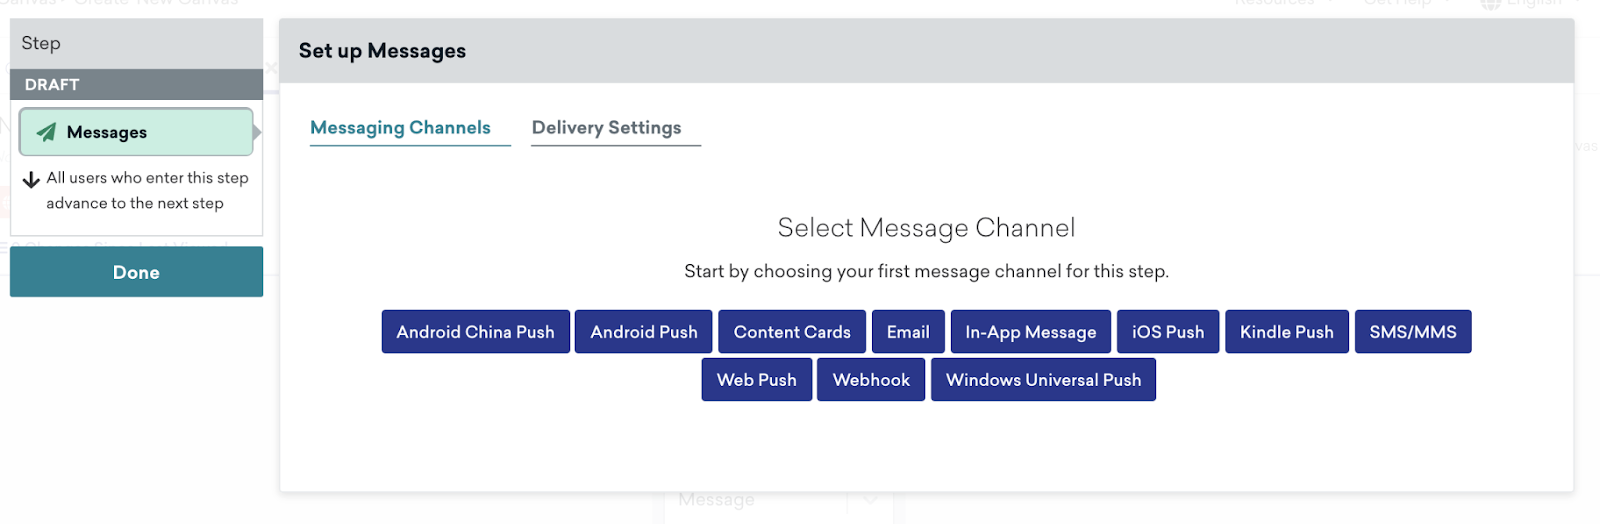 Set up Messages settings for a Canvas Message Step that includes the option to select your message channel and customize delivery settings.